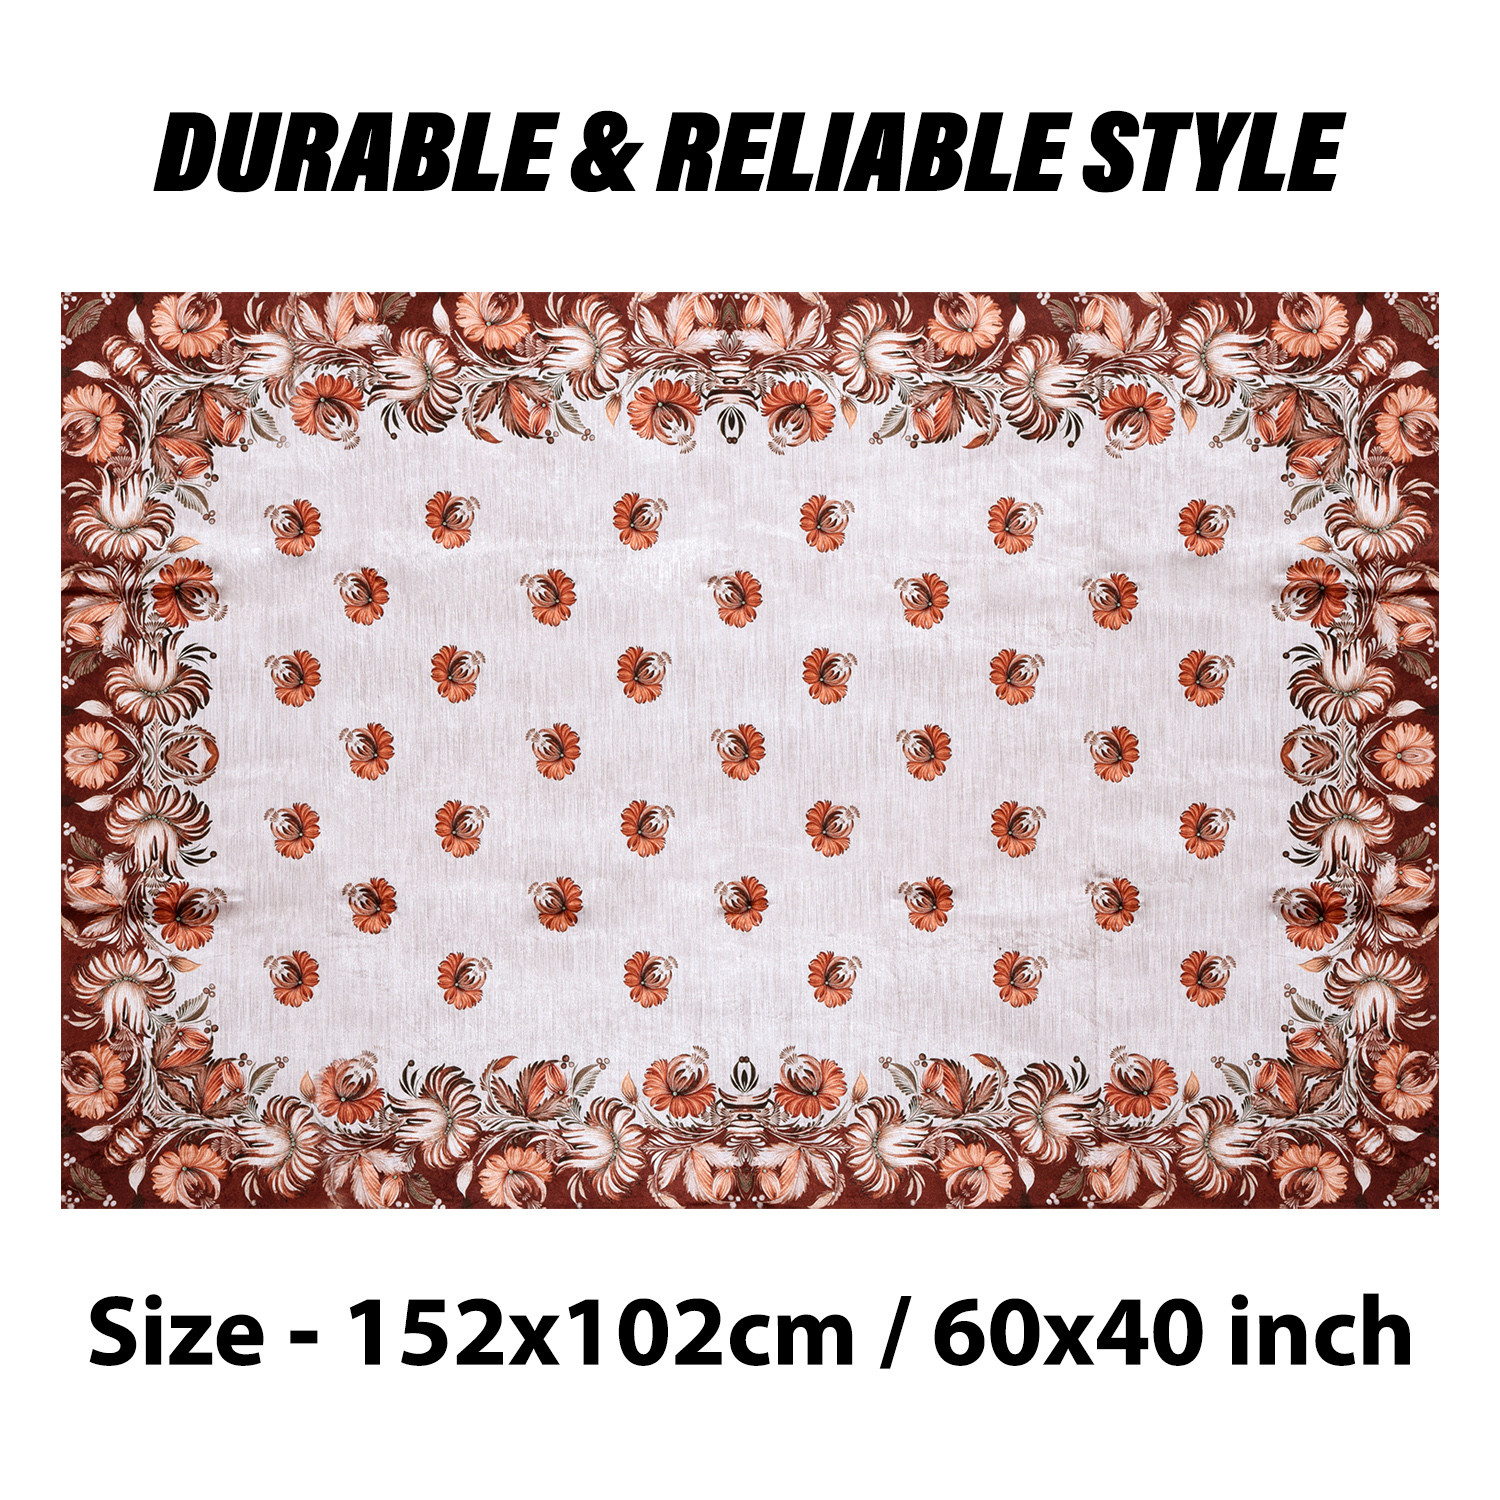 Kuber Industries Center Table Cover | Velvet Sparkle Table Cover | Brown Digital Flower Table Cover | Reusable Cloth Cover for Table Top | Table Protector Cover | 40x60 Inch | Golden